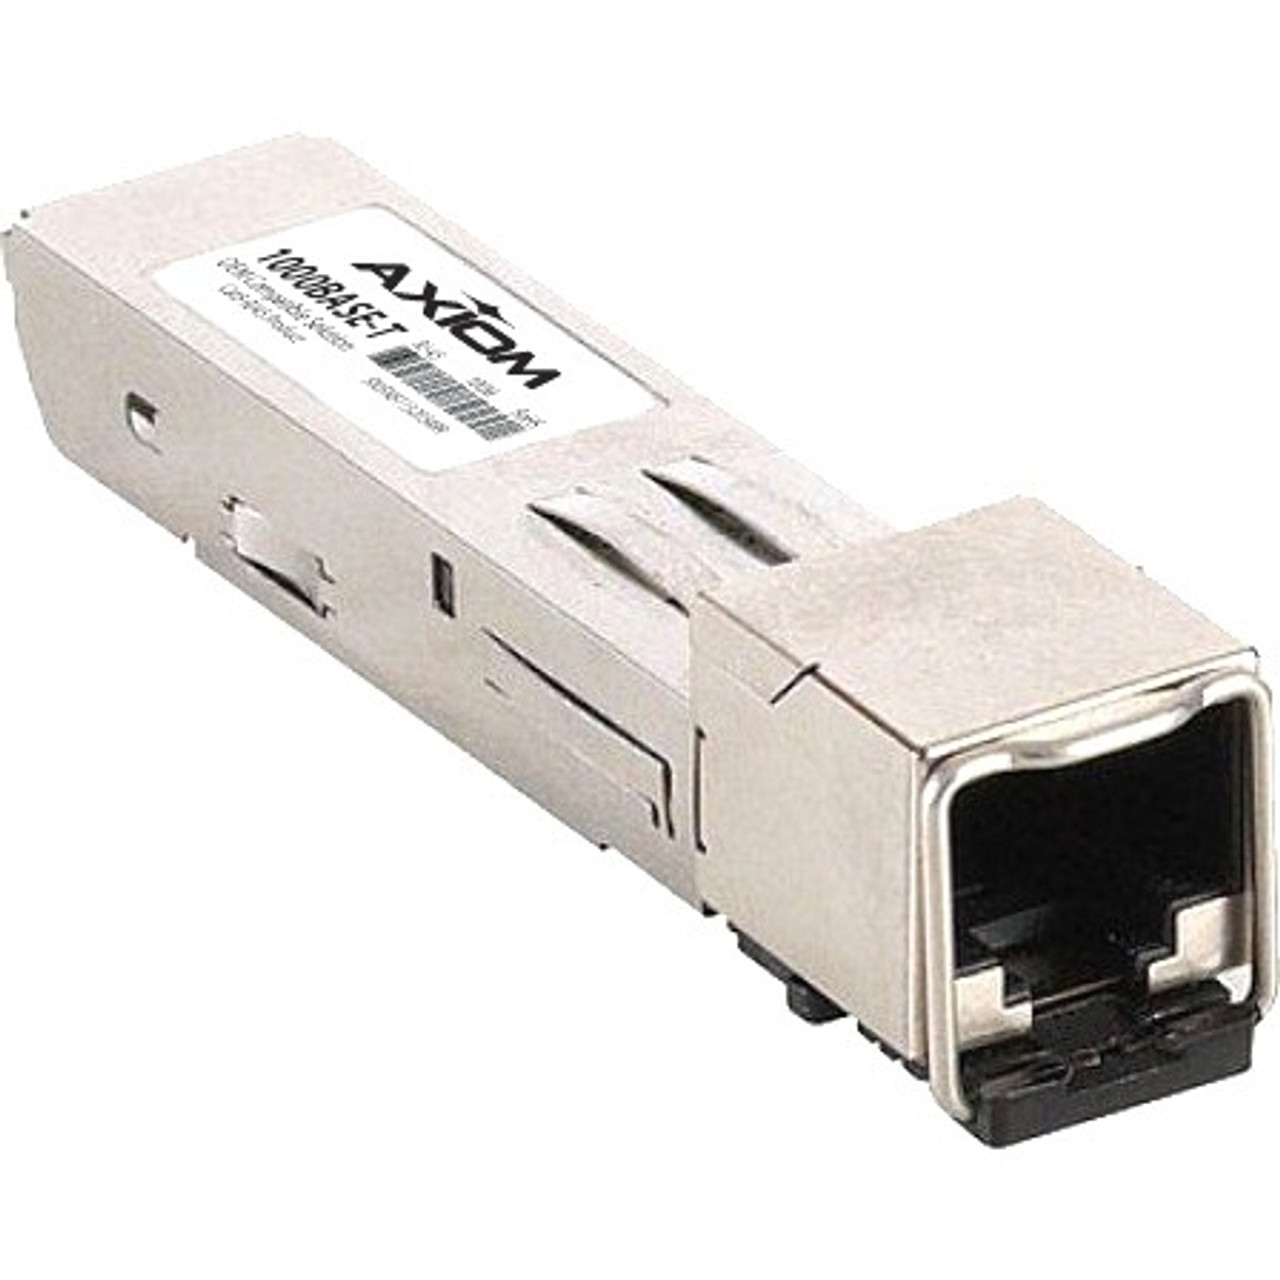 AT-SPTX-AX Axiom 1.25Gbps 1000Base-T Copper 100m RJ-45 Connector SFP Transceiver Module for Allied Telesis Compatible